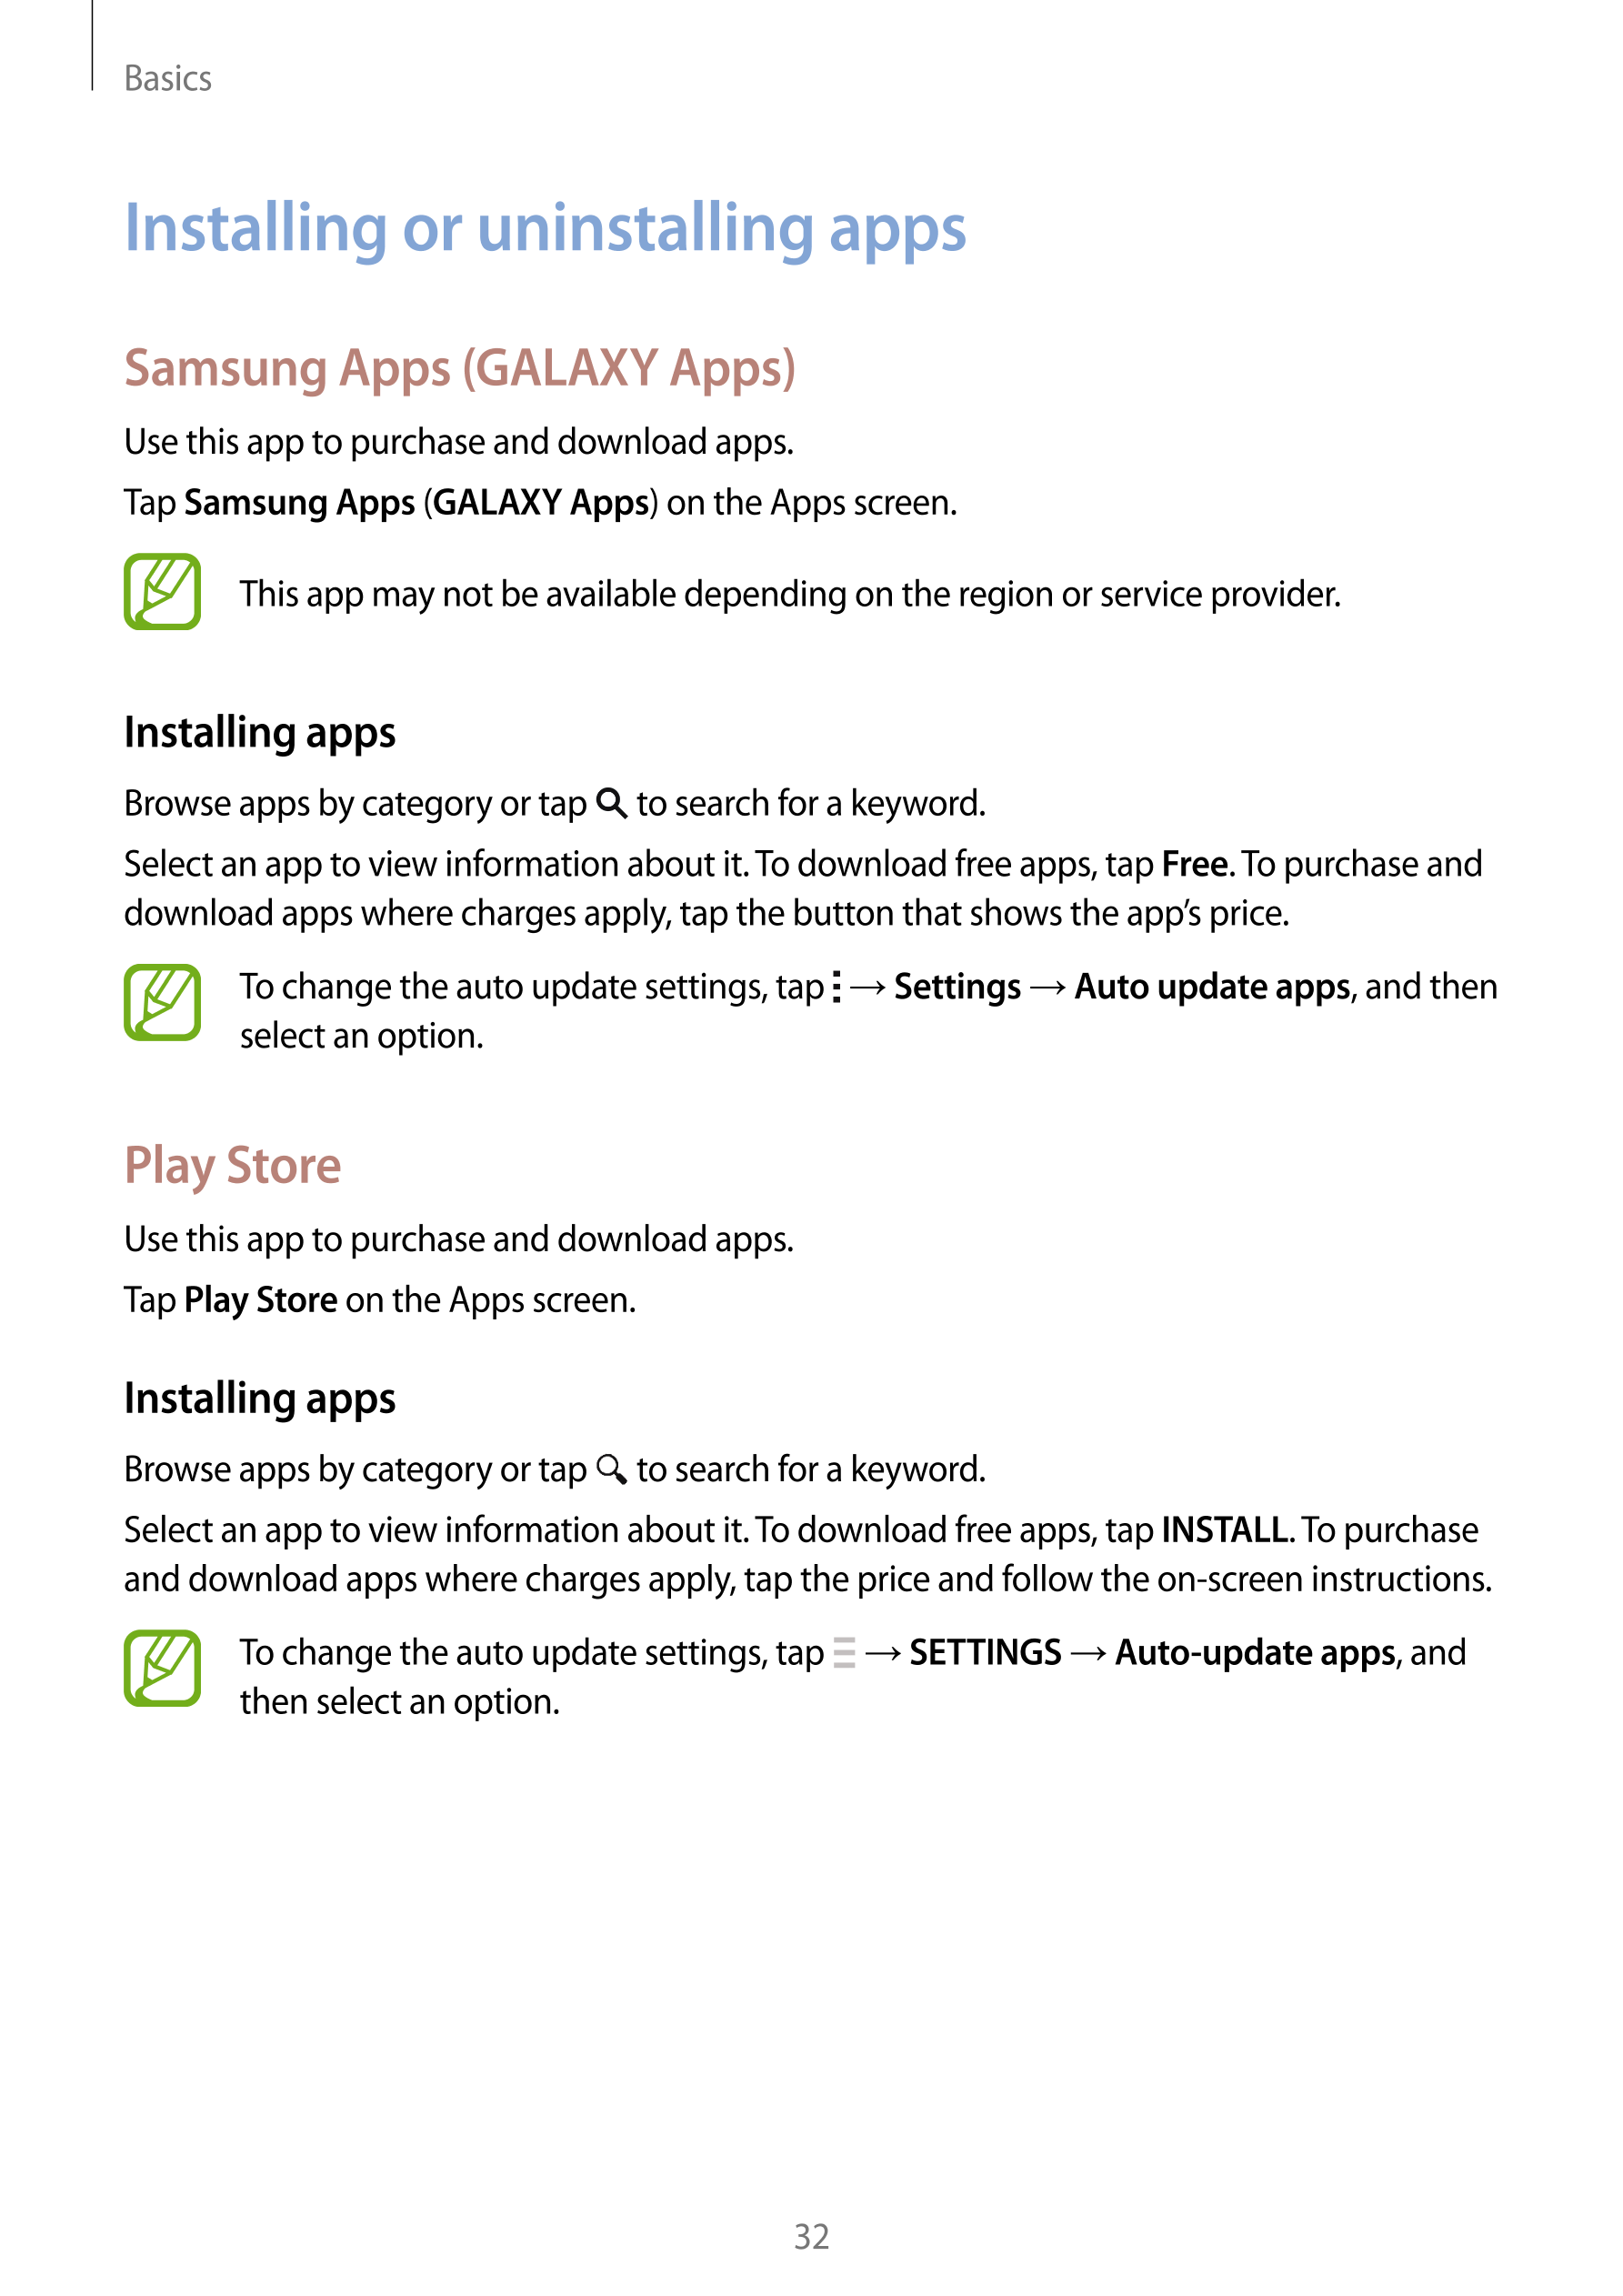 Basics
Installing or uninstalling apps
Samsung Apps (GALAXY Apps)
Use this app to purchase and download apps.
Tap  Samsung Apps 